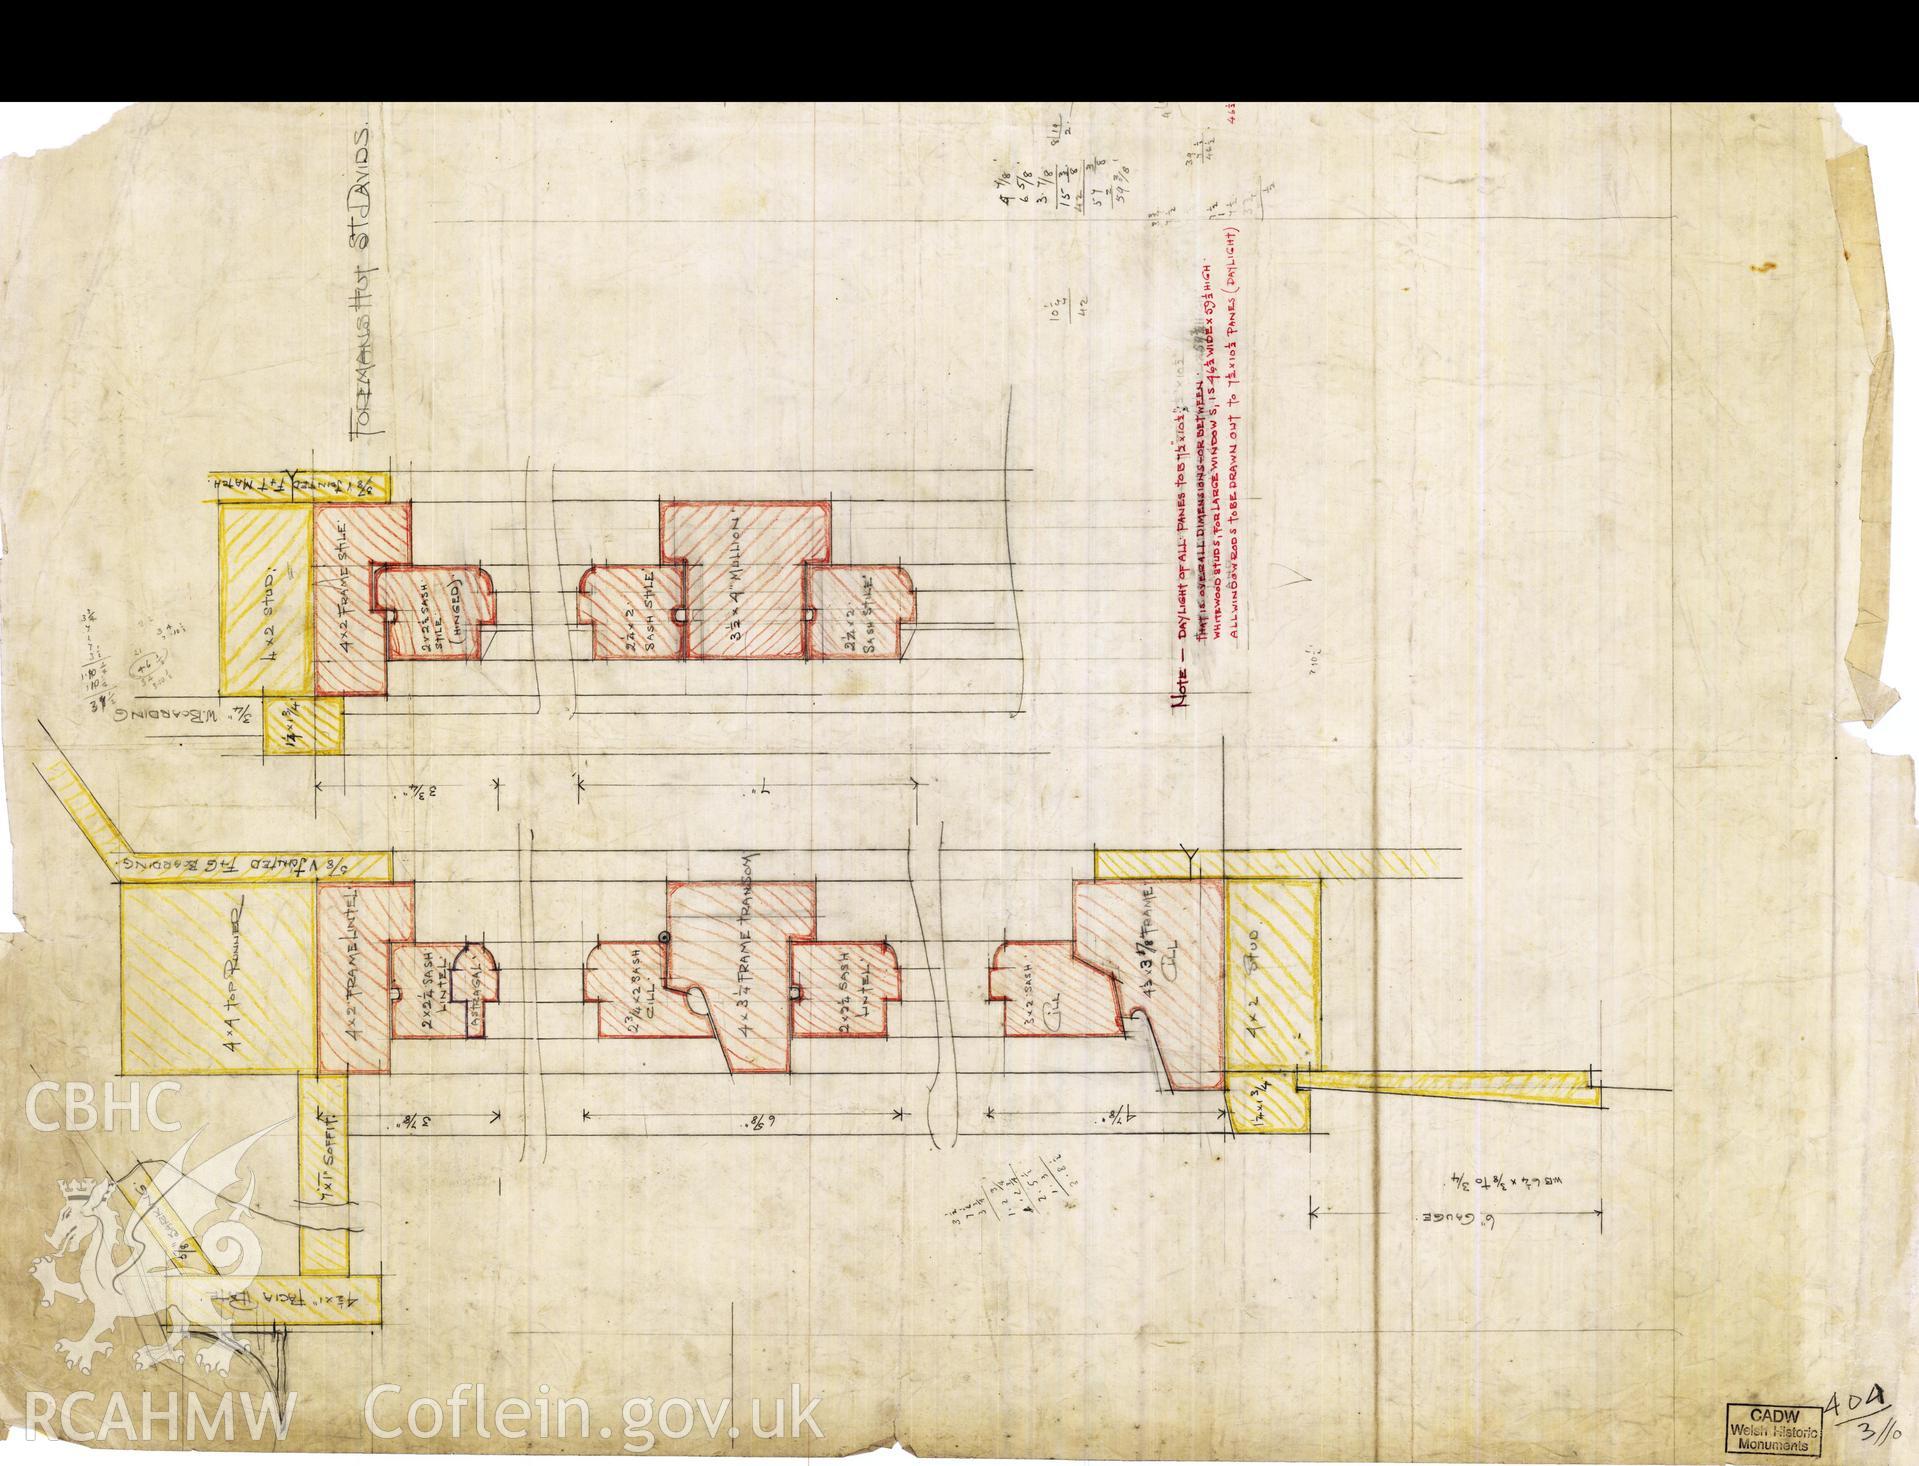 Cadw guardianship monument drawing of St David's Bishop's Palace. Foreman's house, window section. Cadw Ref. No:404/3//o. Scale 1:1.